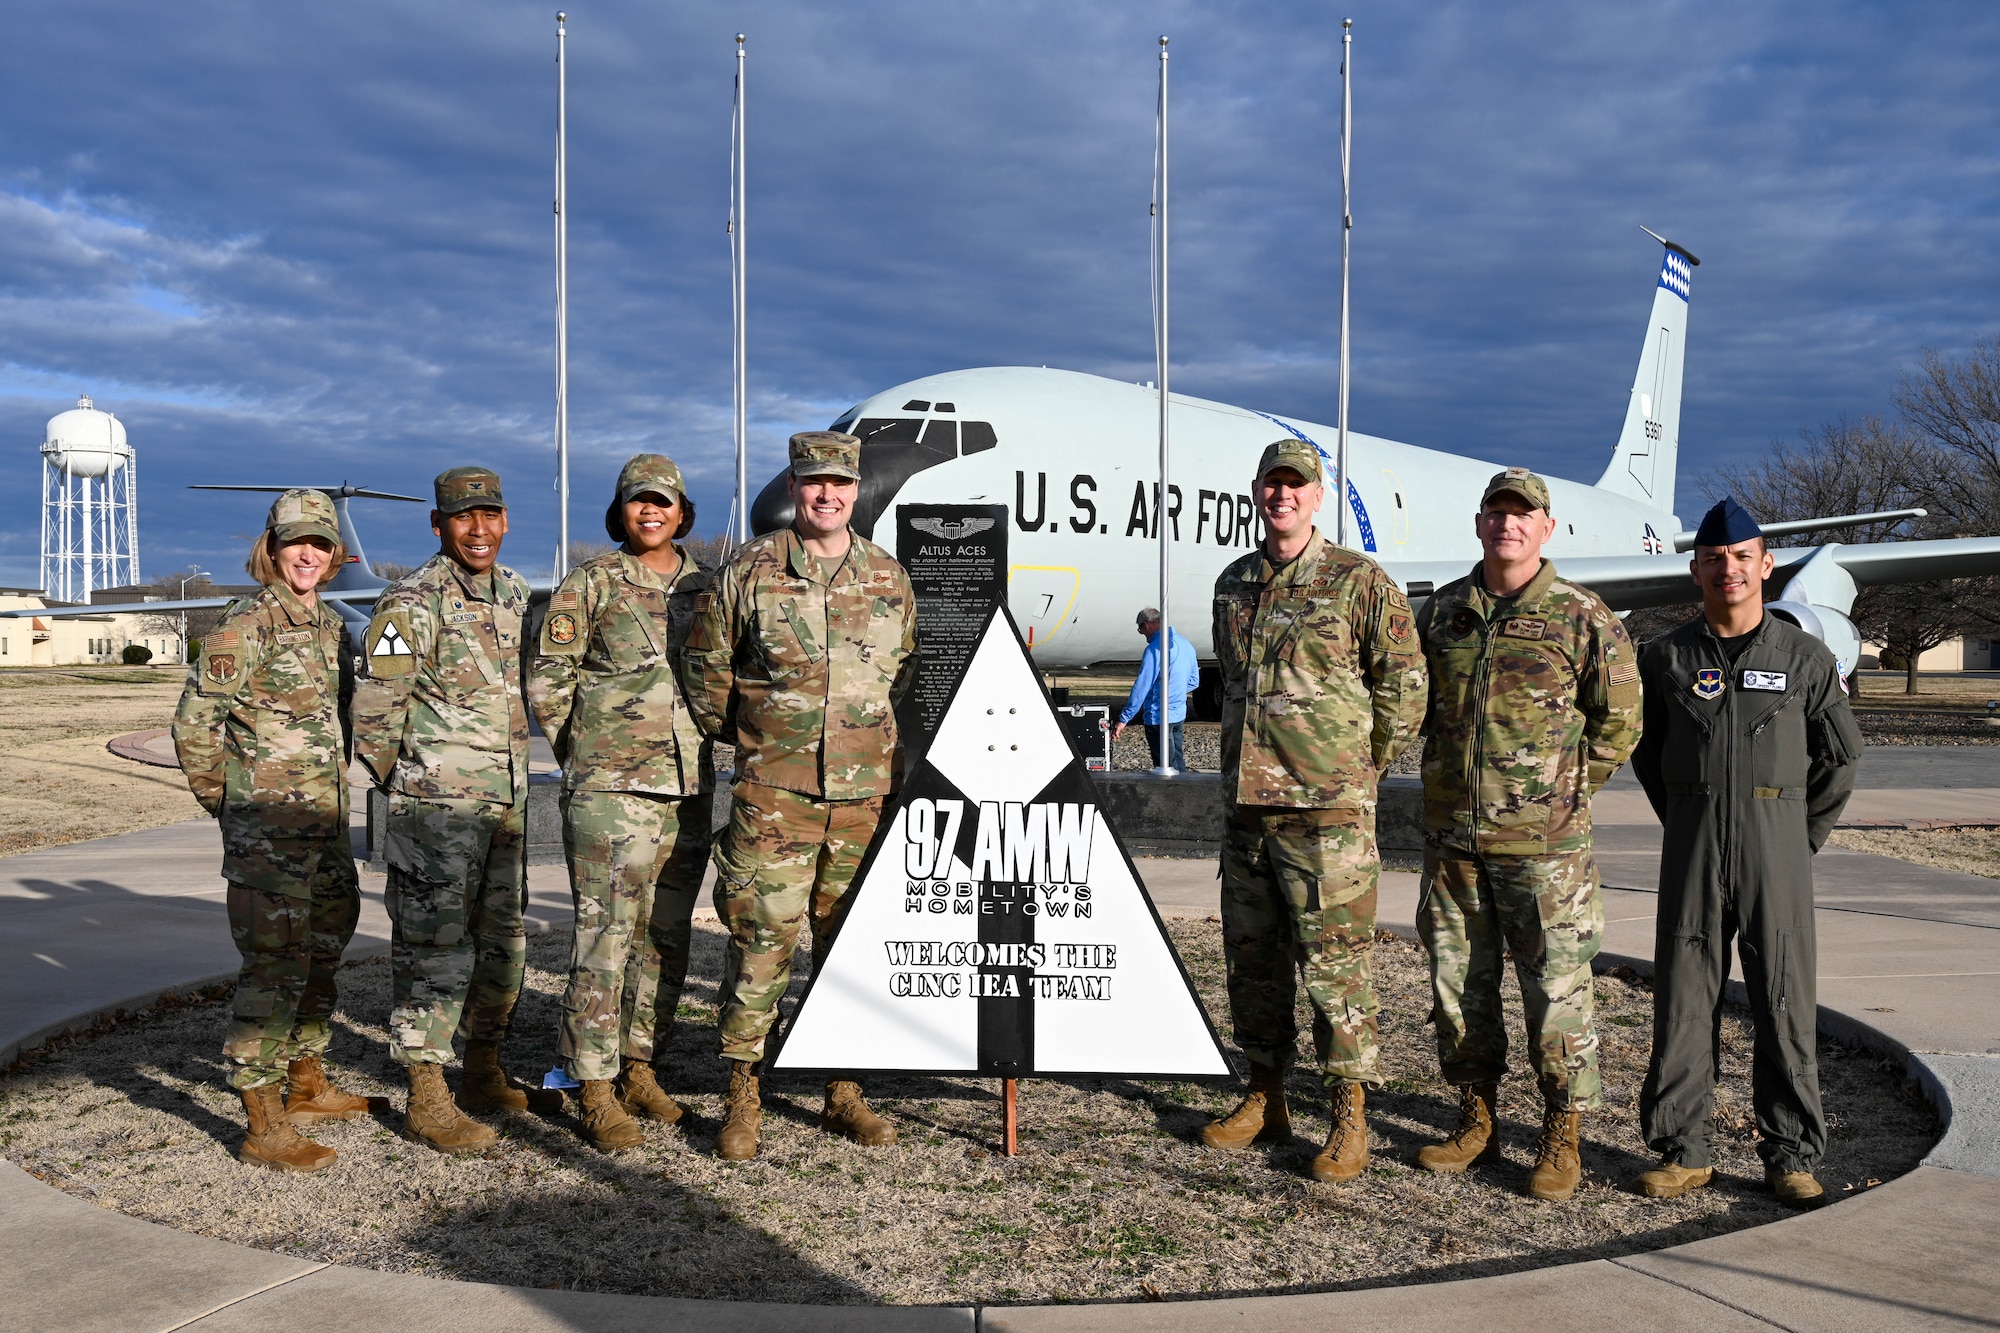 The Commander in Chief Installation Excellence Award evaluation team and 97th Air Mobility Wing command team pose for a photo at Altus Air Force Base (AFB), Oklahoma, Jan. 20, 2023. U.S Air Force Brig. Gen. Brian Hartless, Air Force director of engineers, and his team of evaluators toured different agencies across Altus AFB, while Airmen and community leaders had the opportunity to share what makes Altus unique. (U.S. Air Force photo by Senior Airman Trenton Jancze)